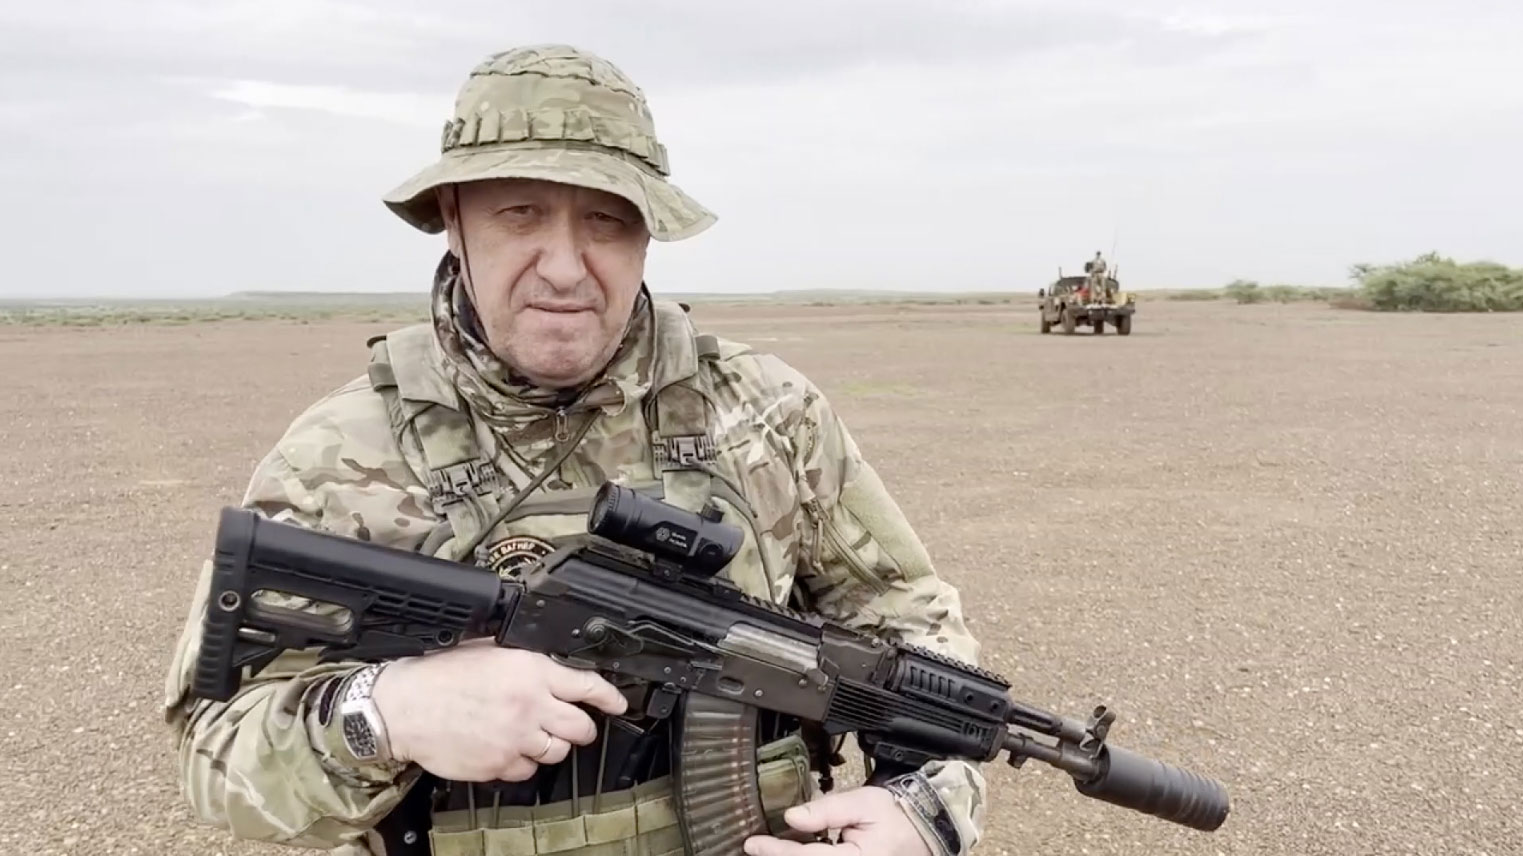 A screen grab captured from a video shared online shows Yevgeny Prigozhin, the founder of the Russian private security company Wagner, holding a rifle in a desert area while wearing camouflage in a video for the first time after his rebellion against the Russian administration, in an unspecified location in Africa on August 21, 2023. (Wagner Telegram/Anadolu Agency/Getty Images)